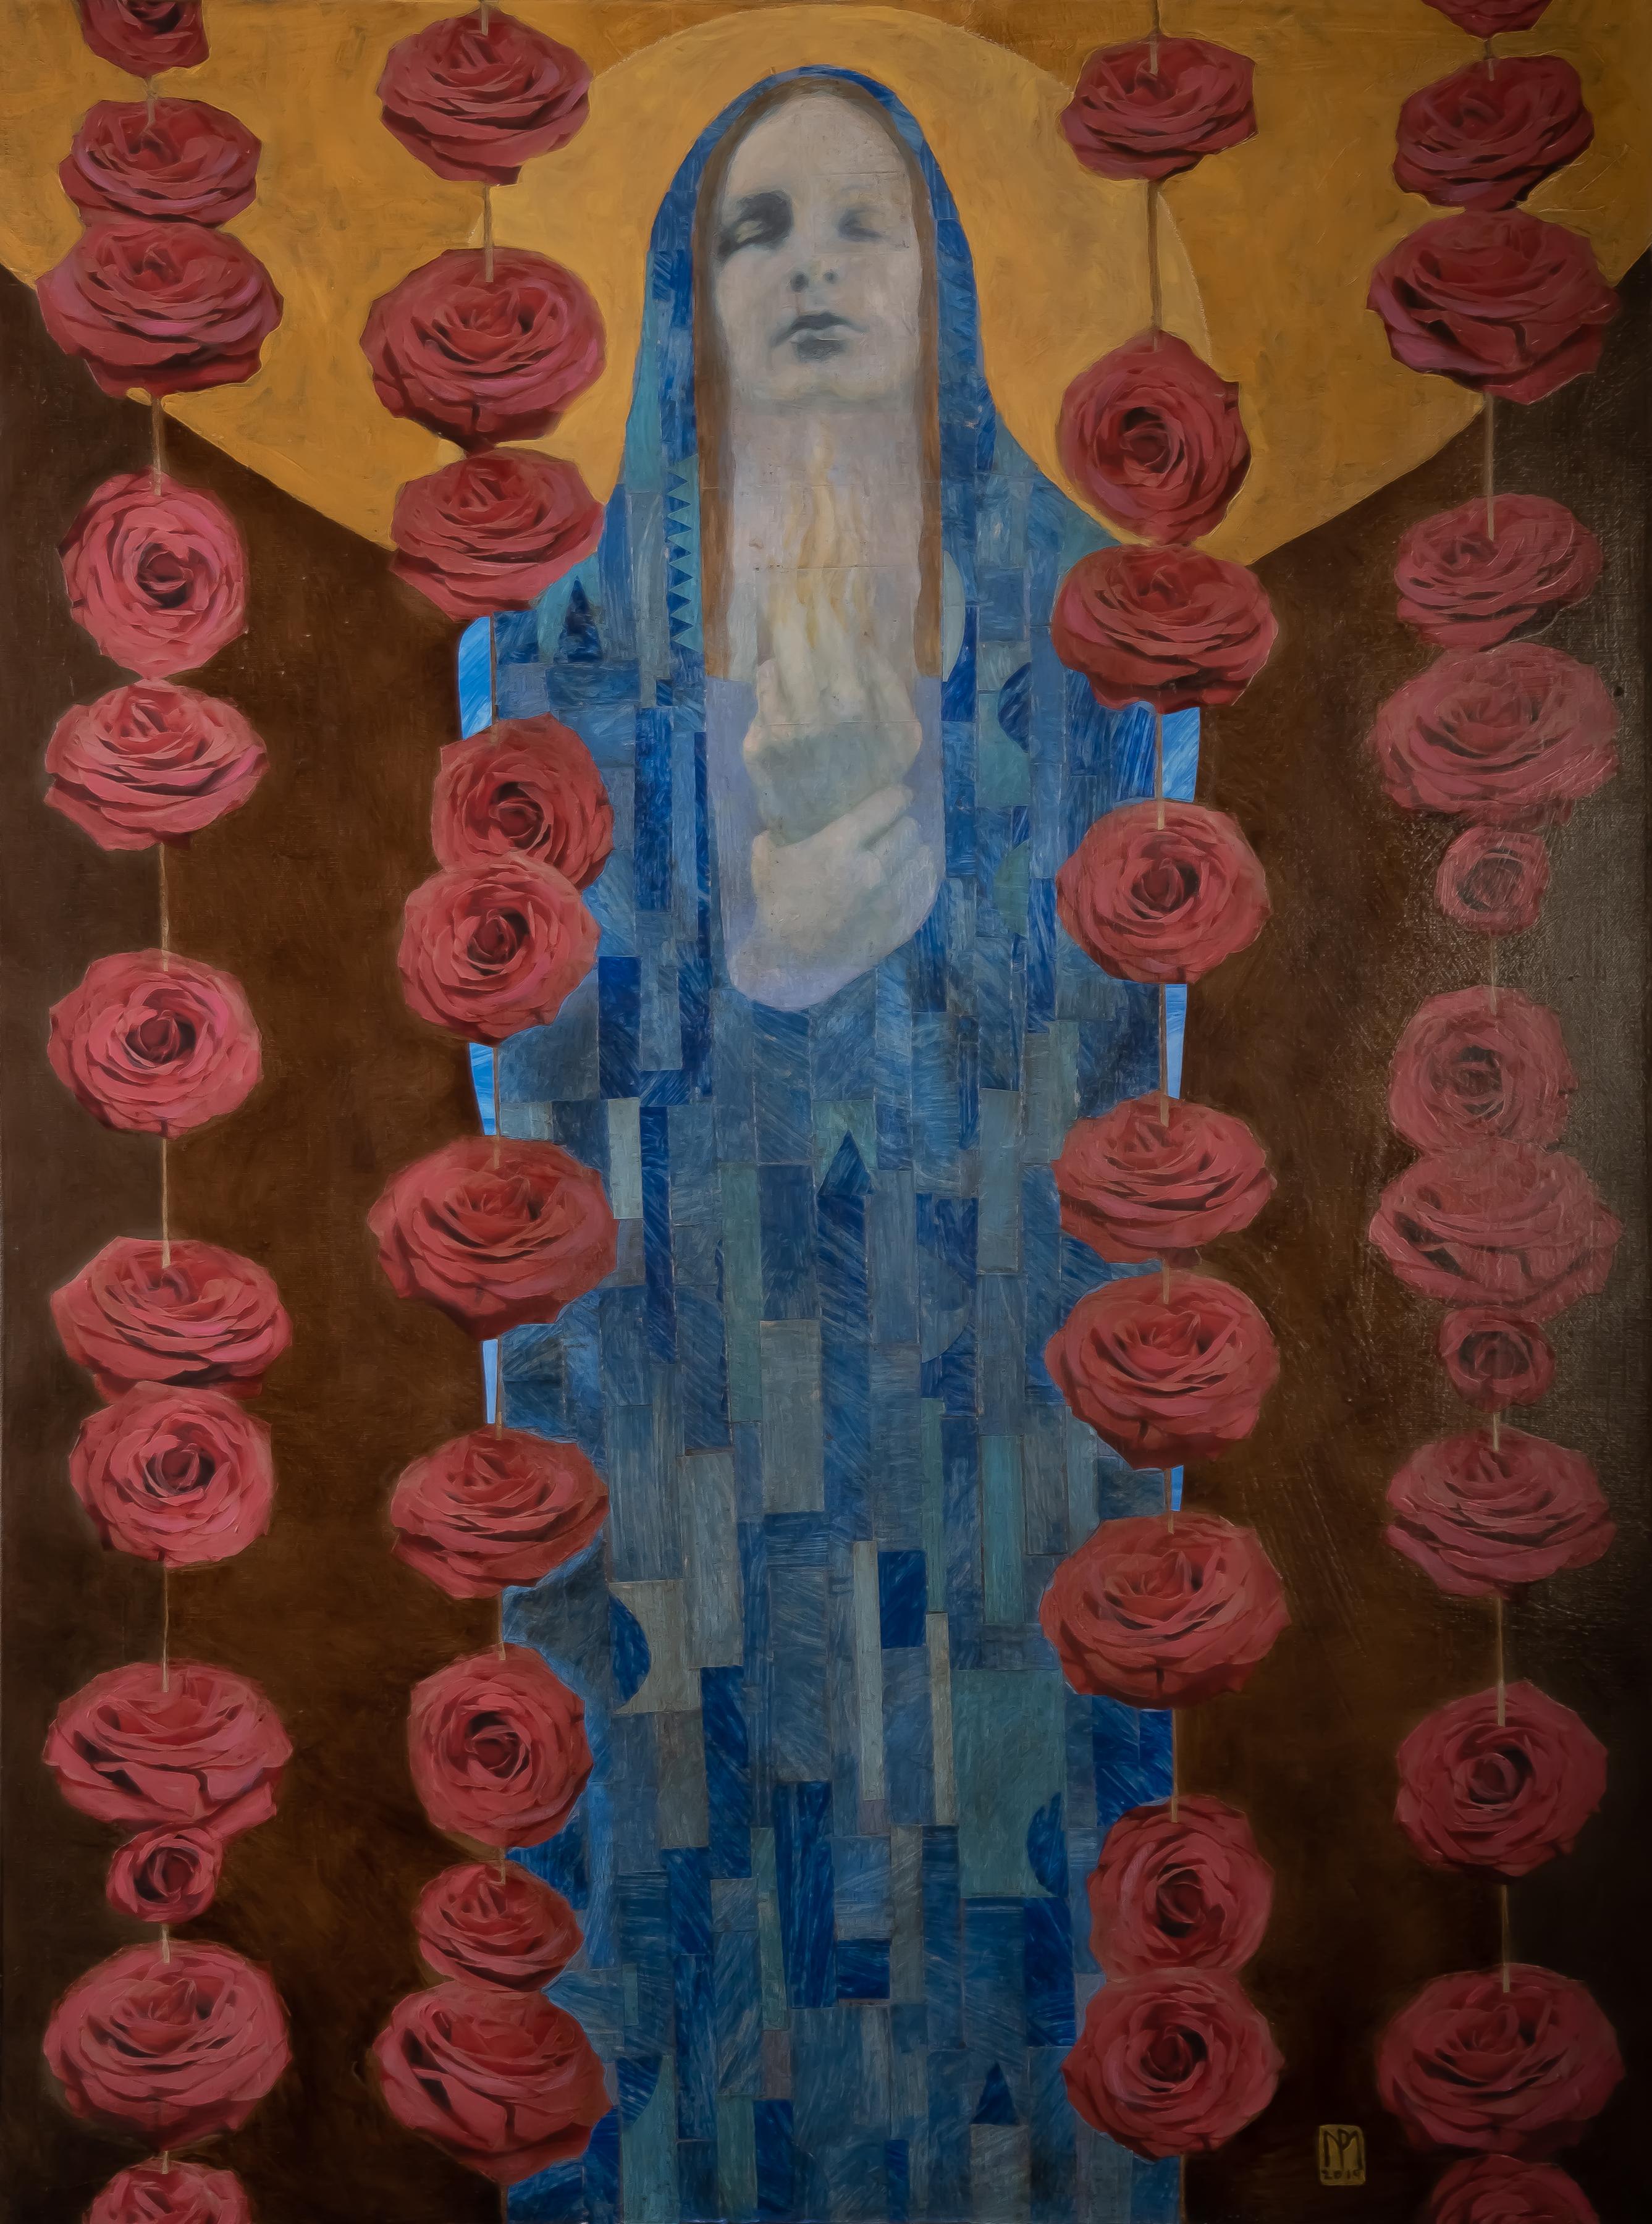 'Emily Suite #1, ' by Paul Medina, Mixed Media on Canvas Painting, 2020